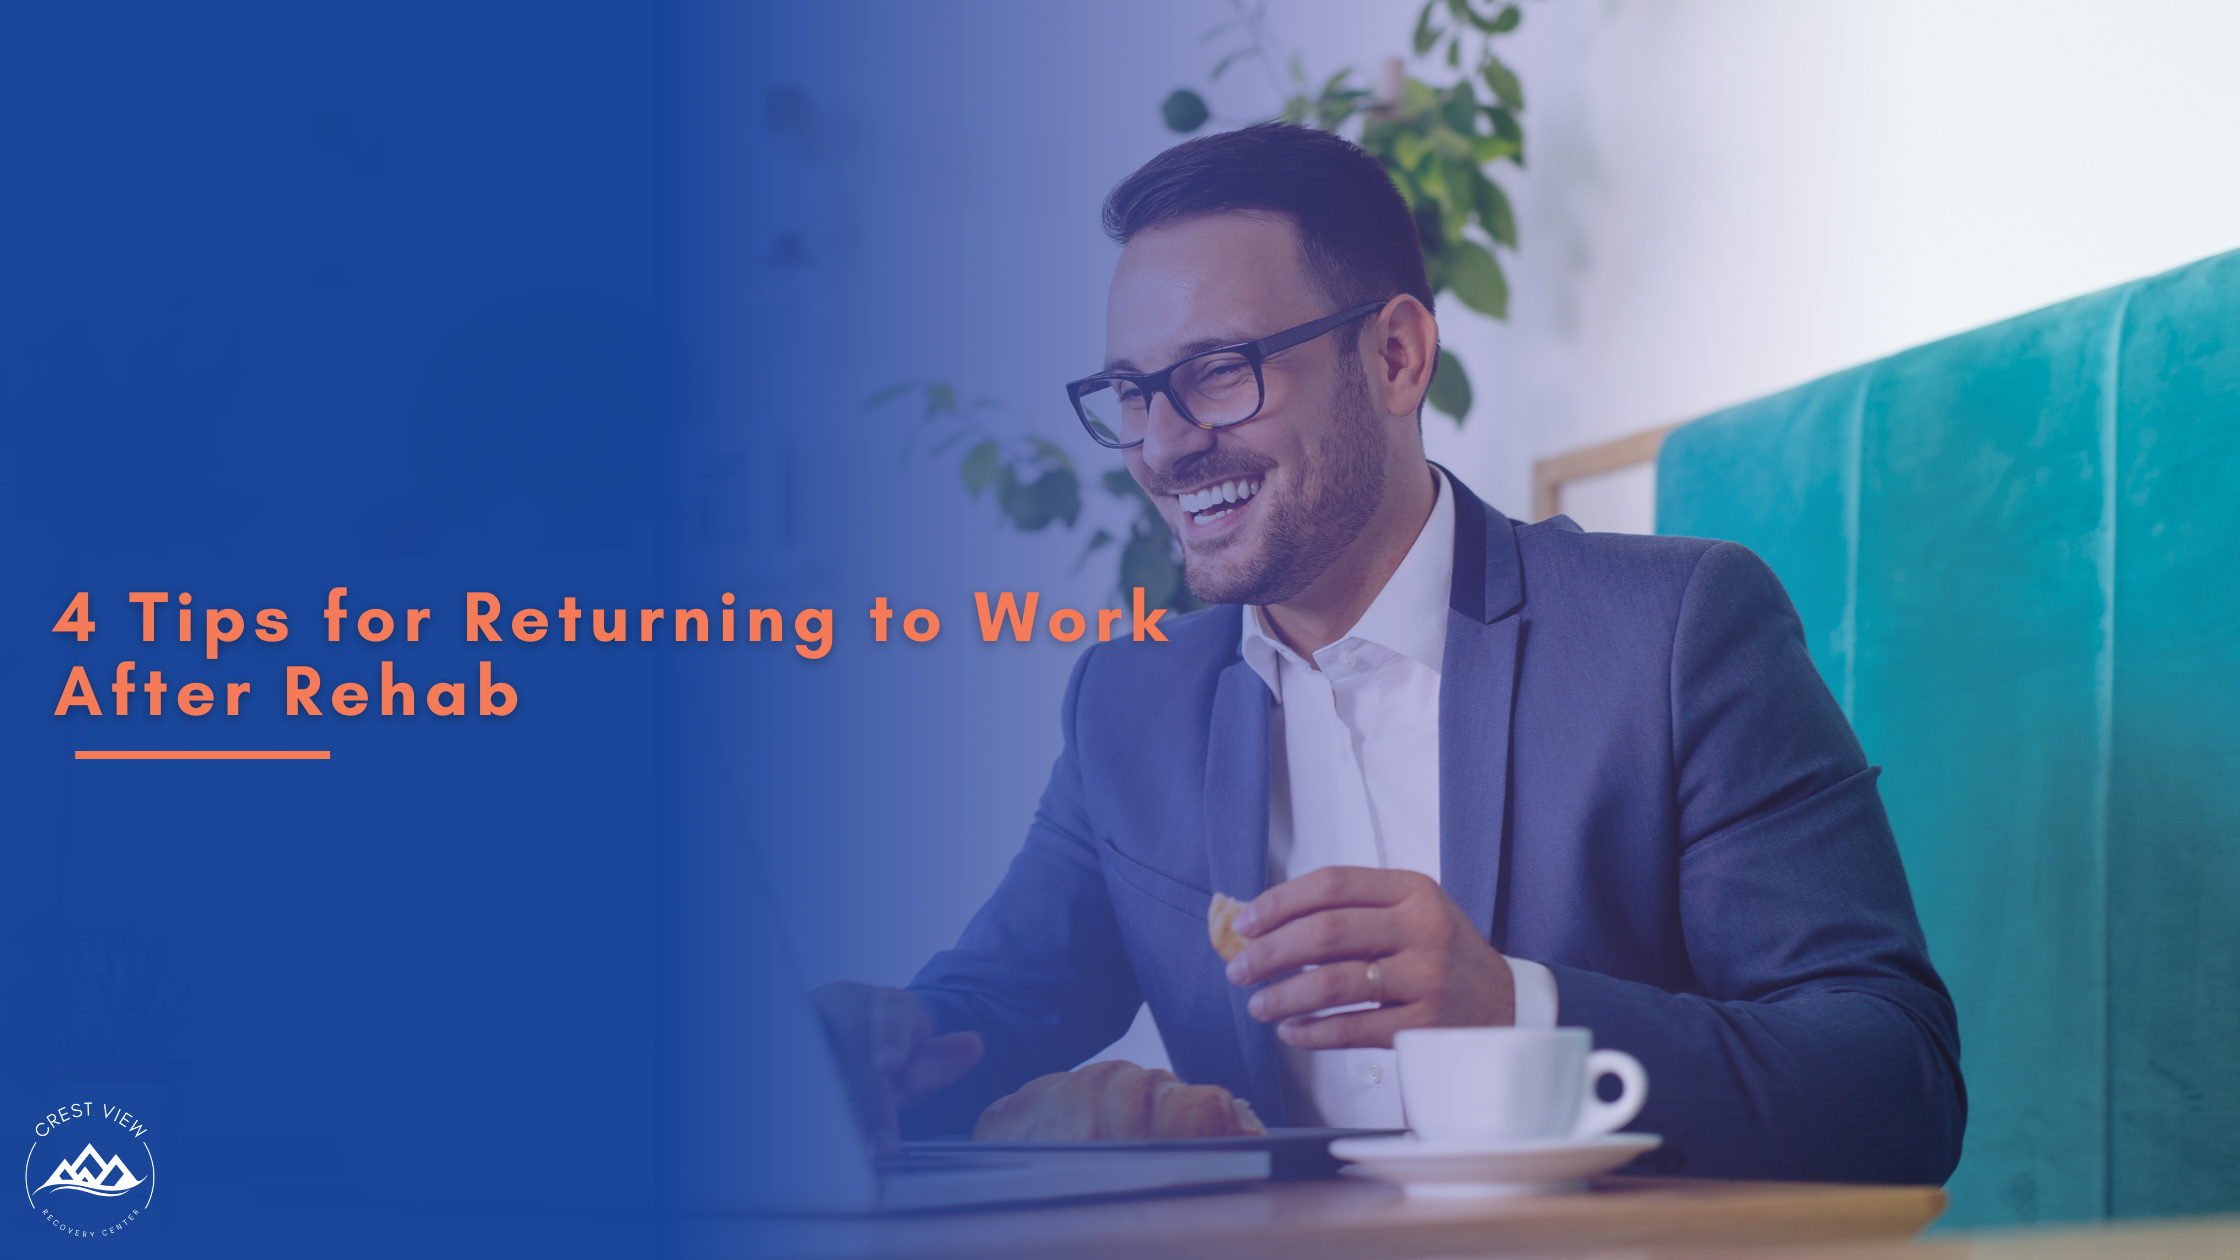 Returning to Work After Rehab